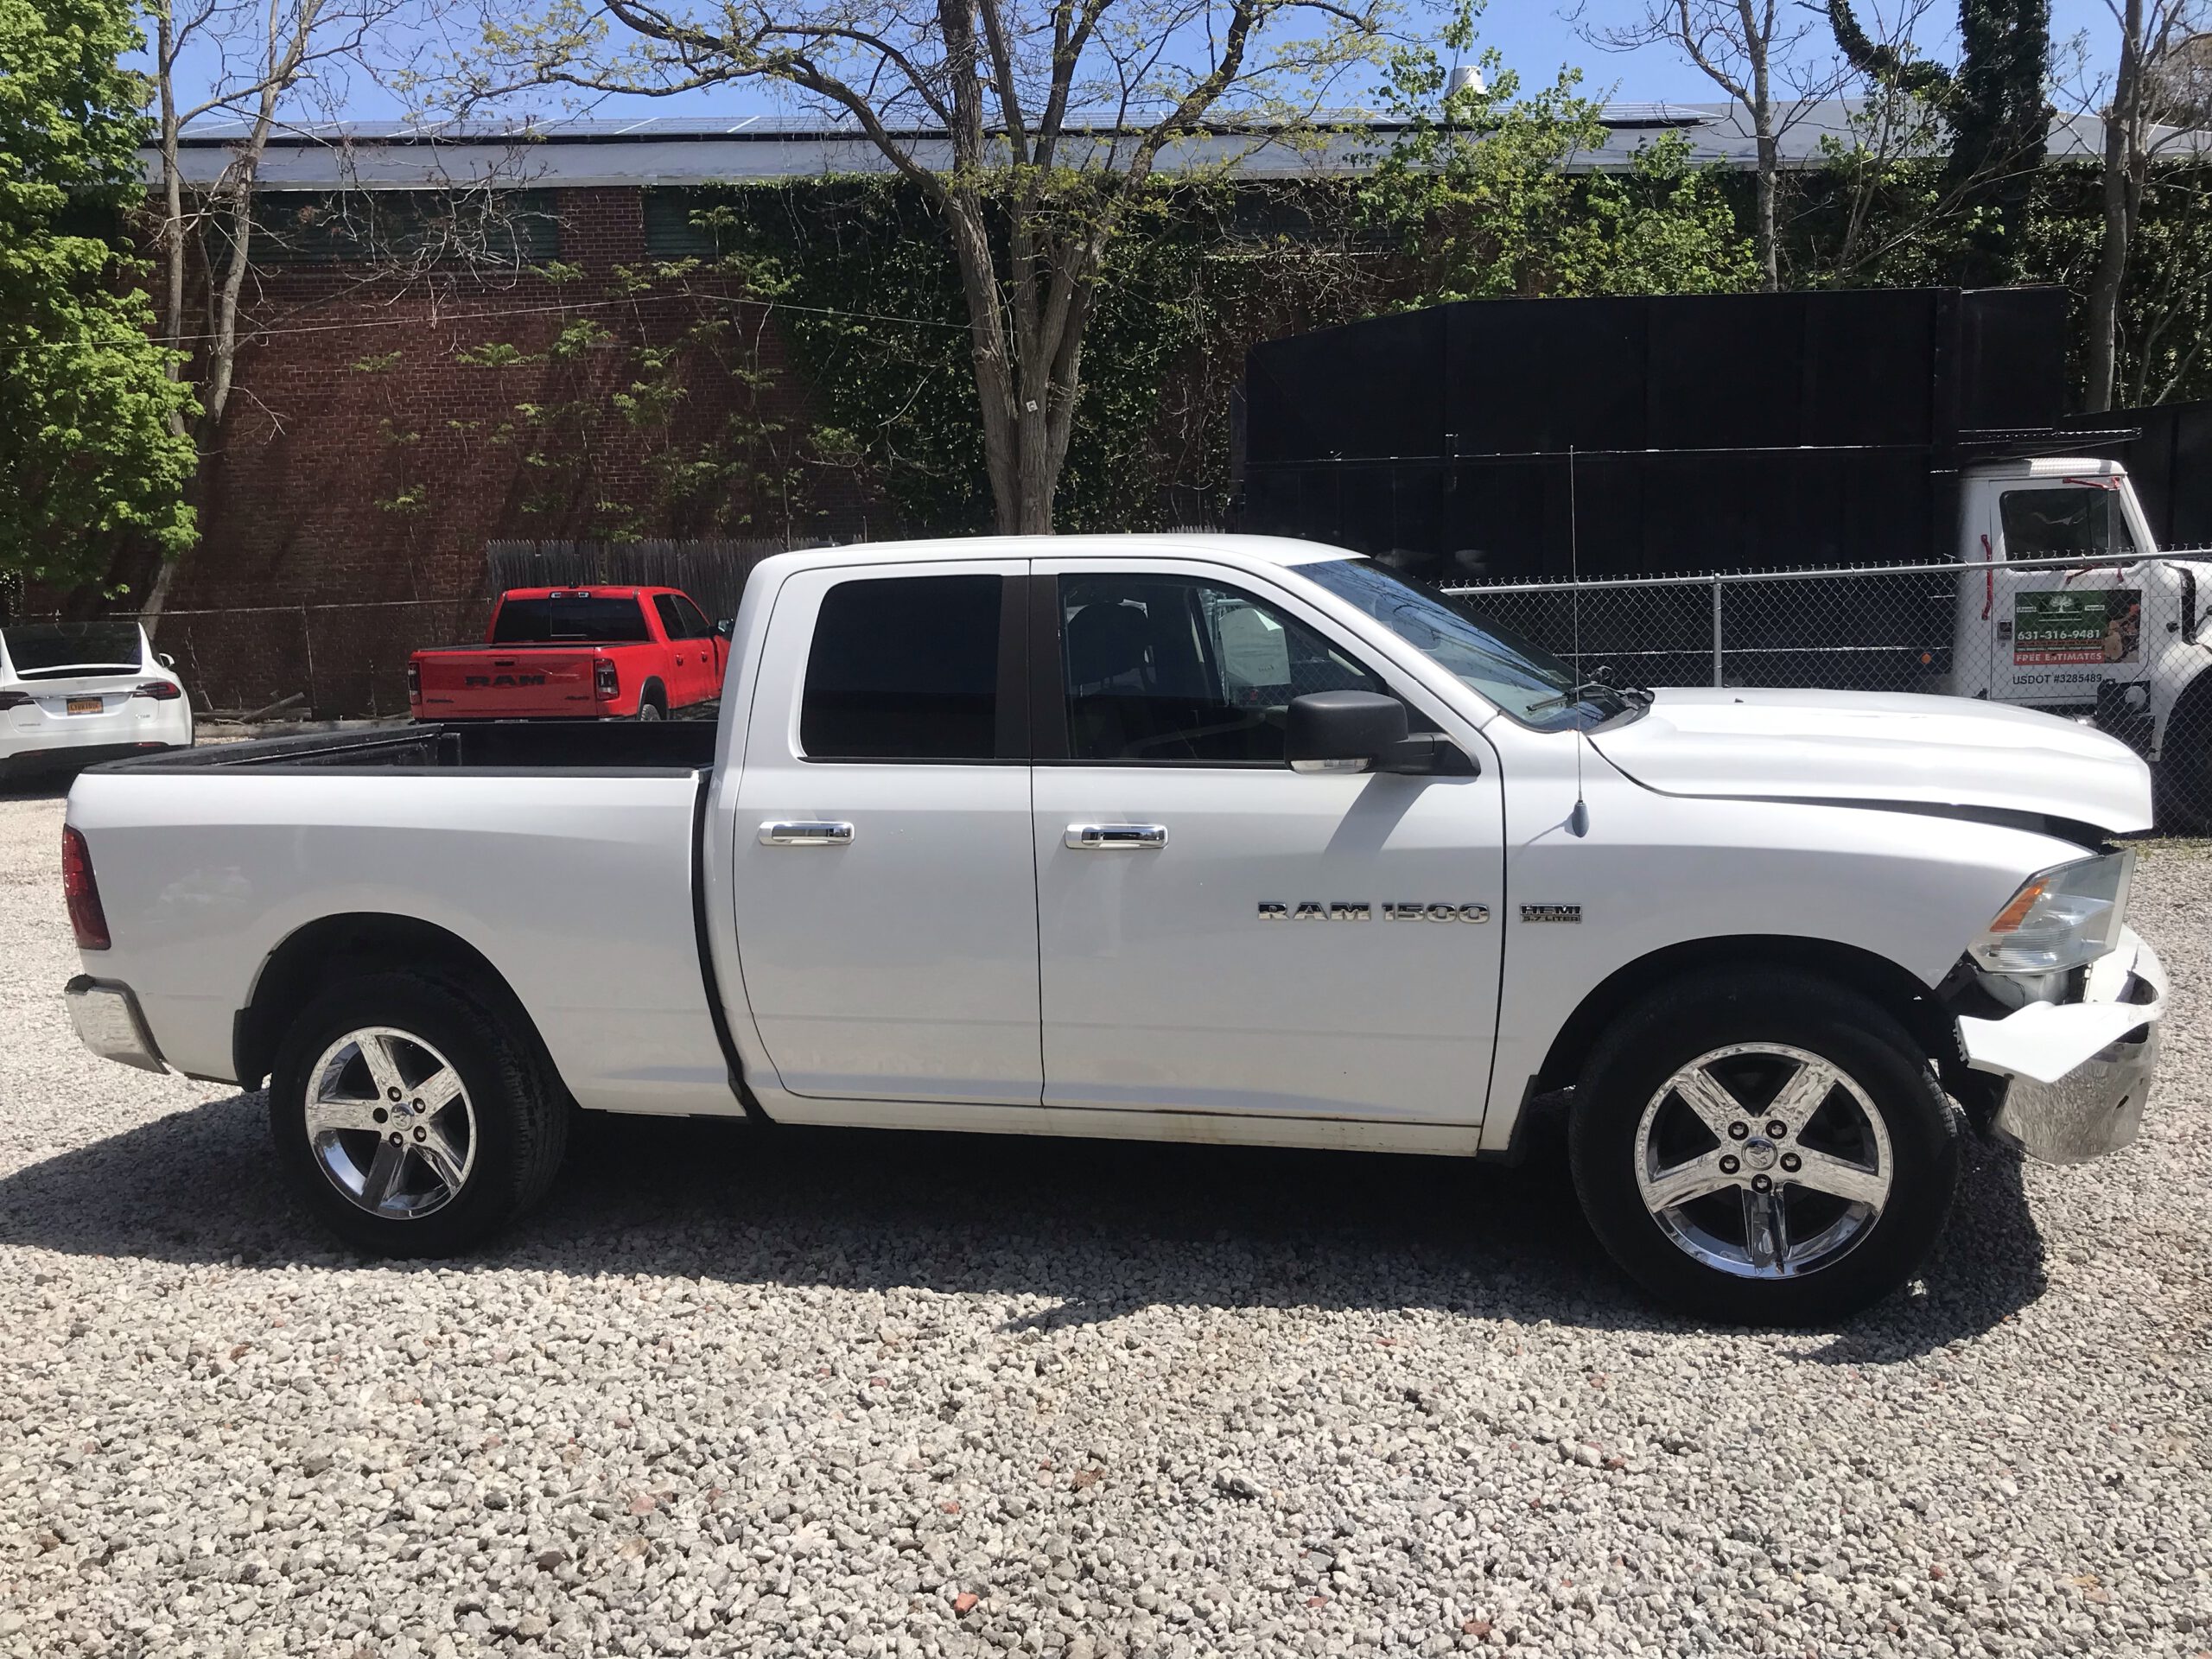 2011 Dodge Ram 1500 4 dr, 4×4, 124k miles, front damage, runs and drives,air bags good, radiator is good  $6,999. full